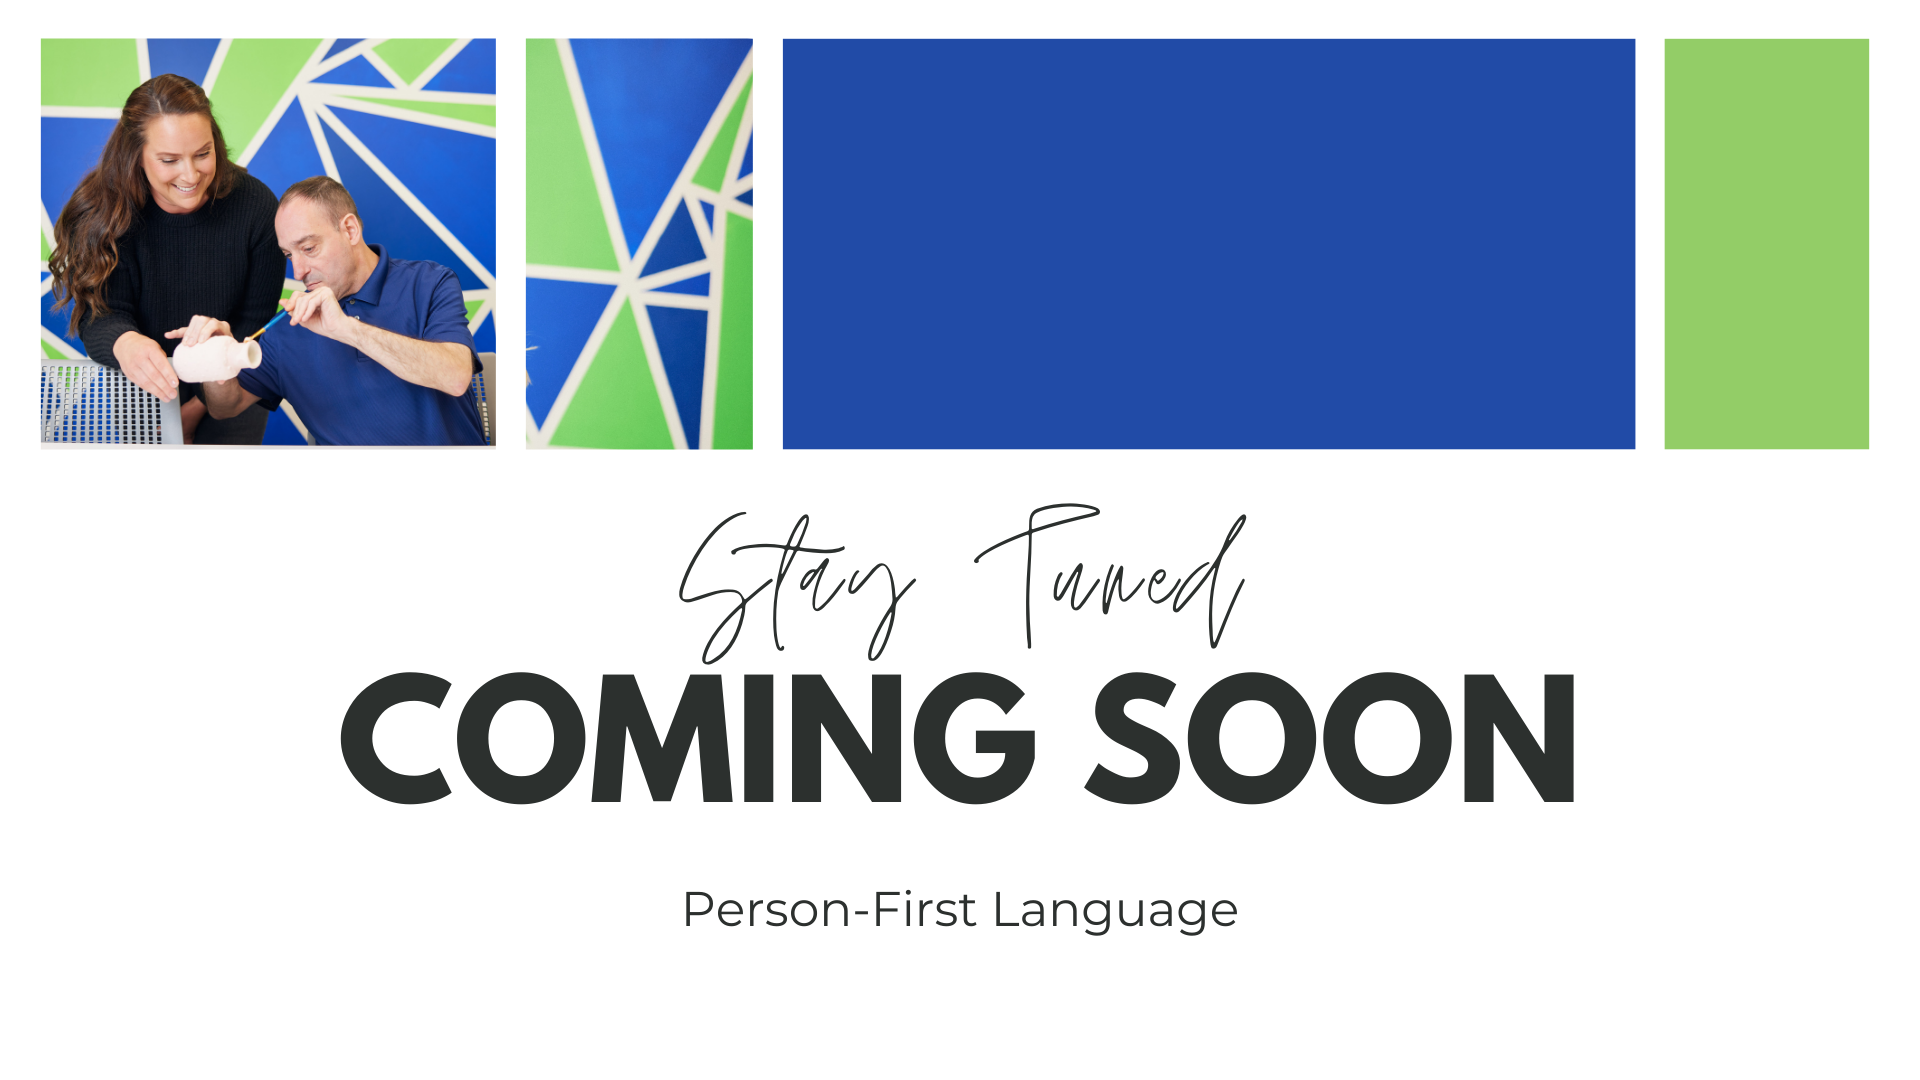 Person-First Language